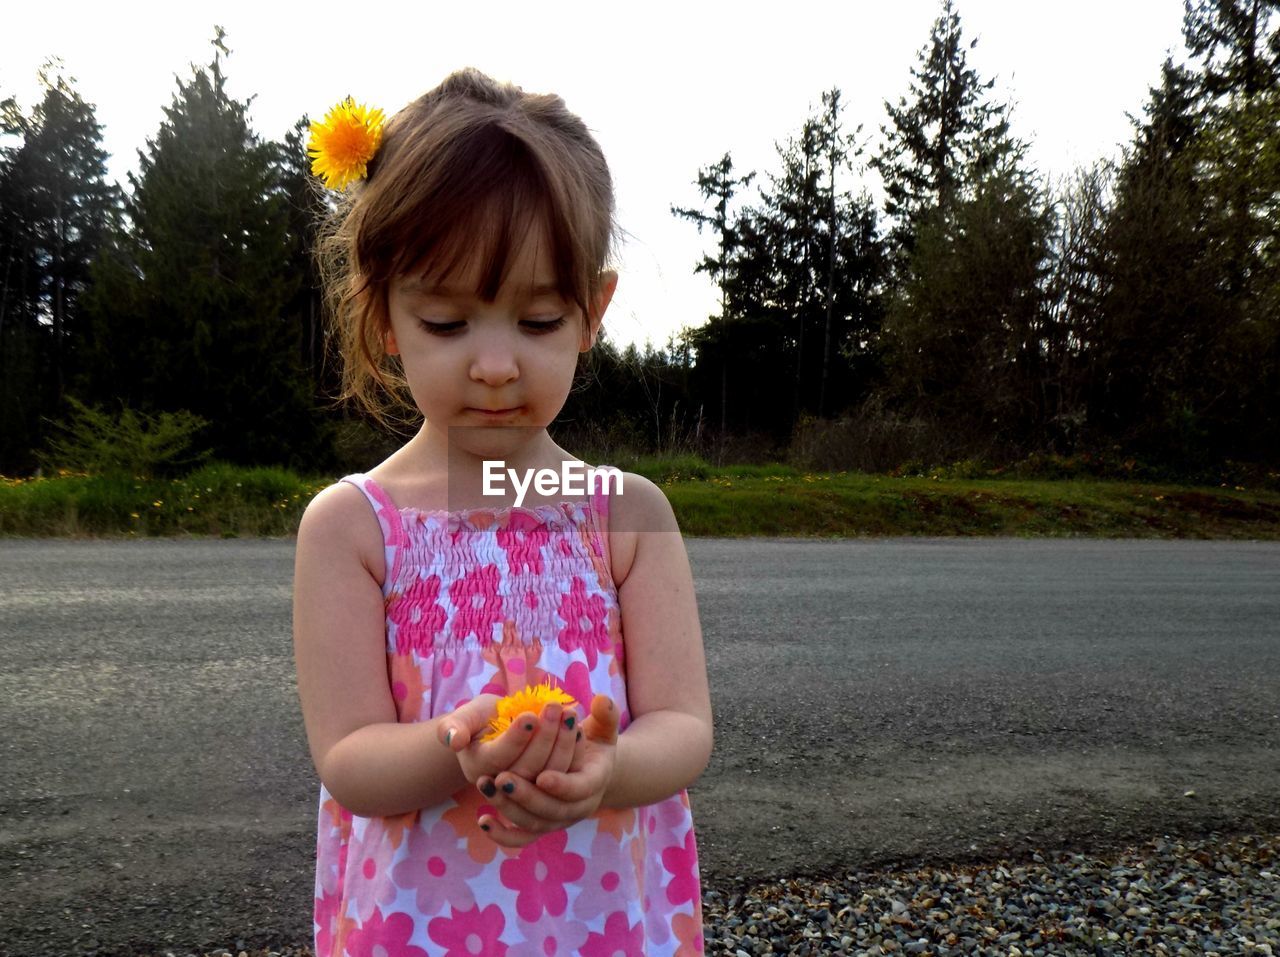 Girl holding yellow flower while standing at roadside